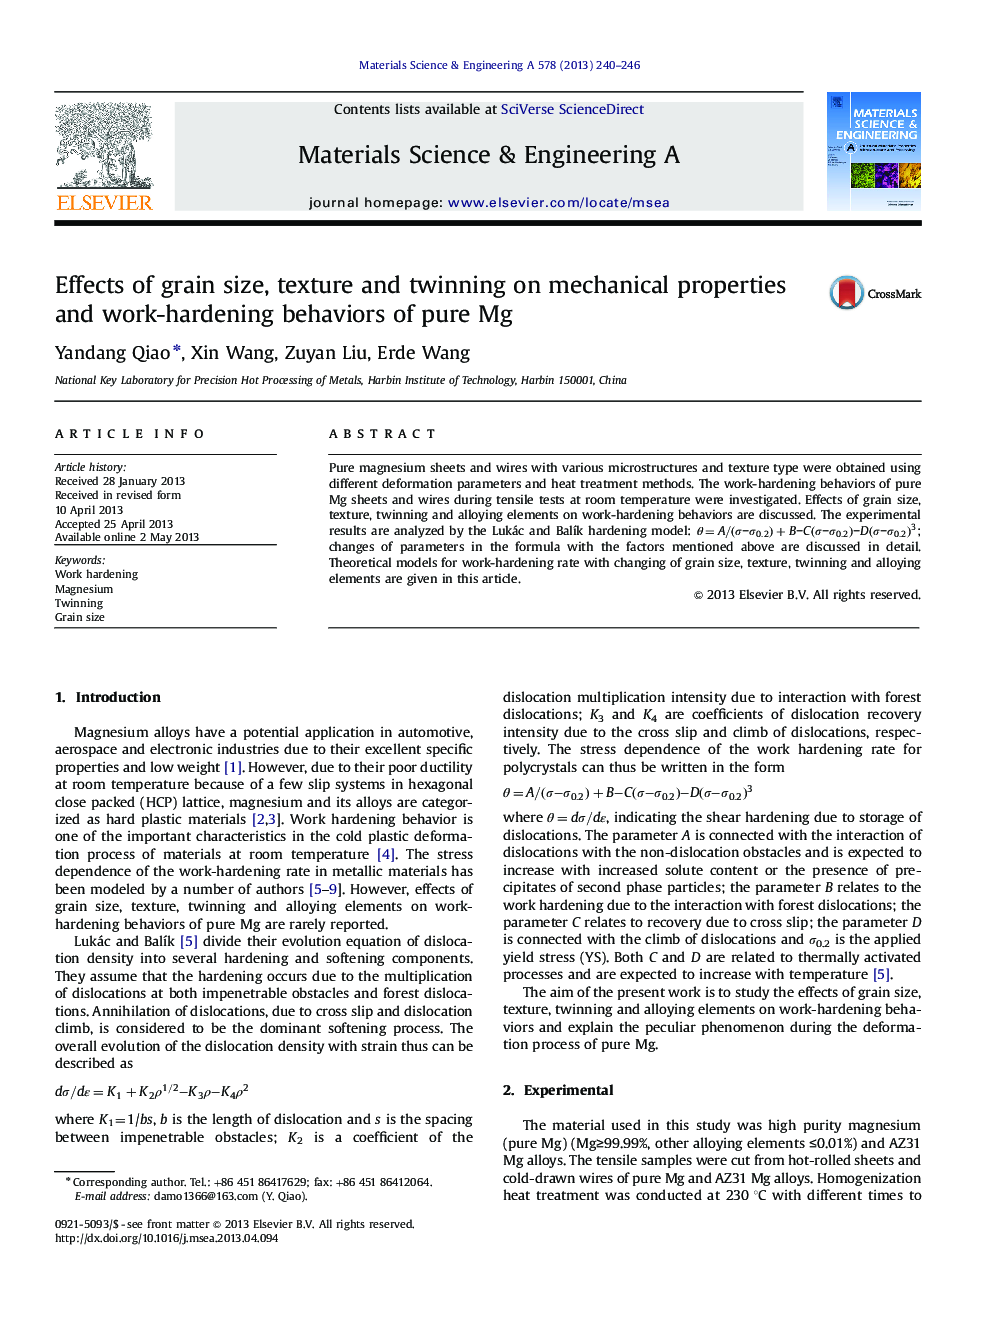 Effects of grain size, texture and twinning on mechanical properties and work-hardening behaviors of pure Mg